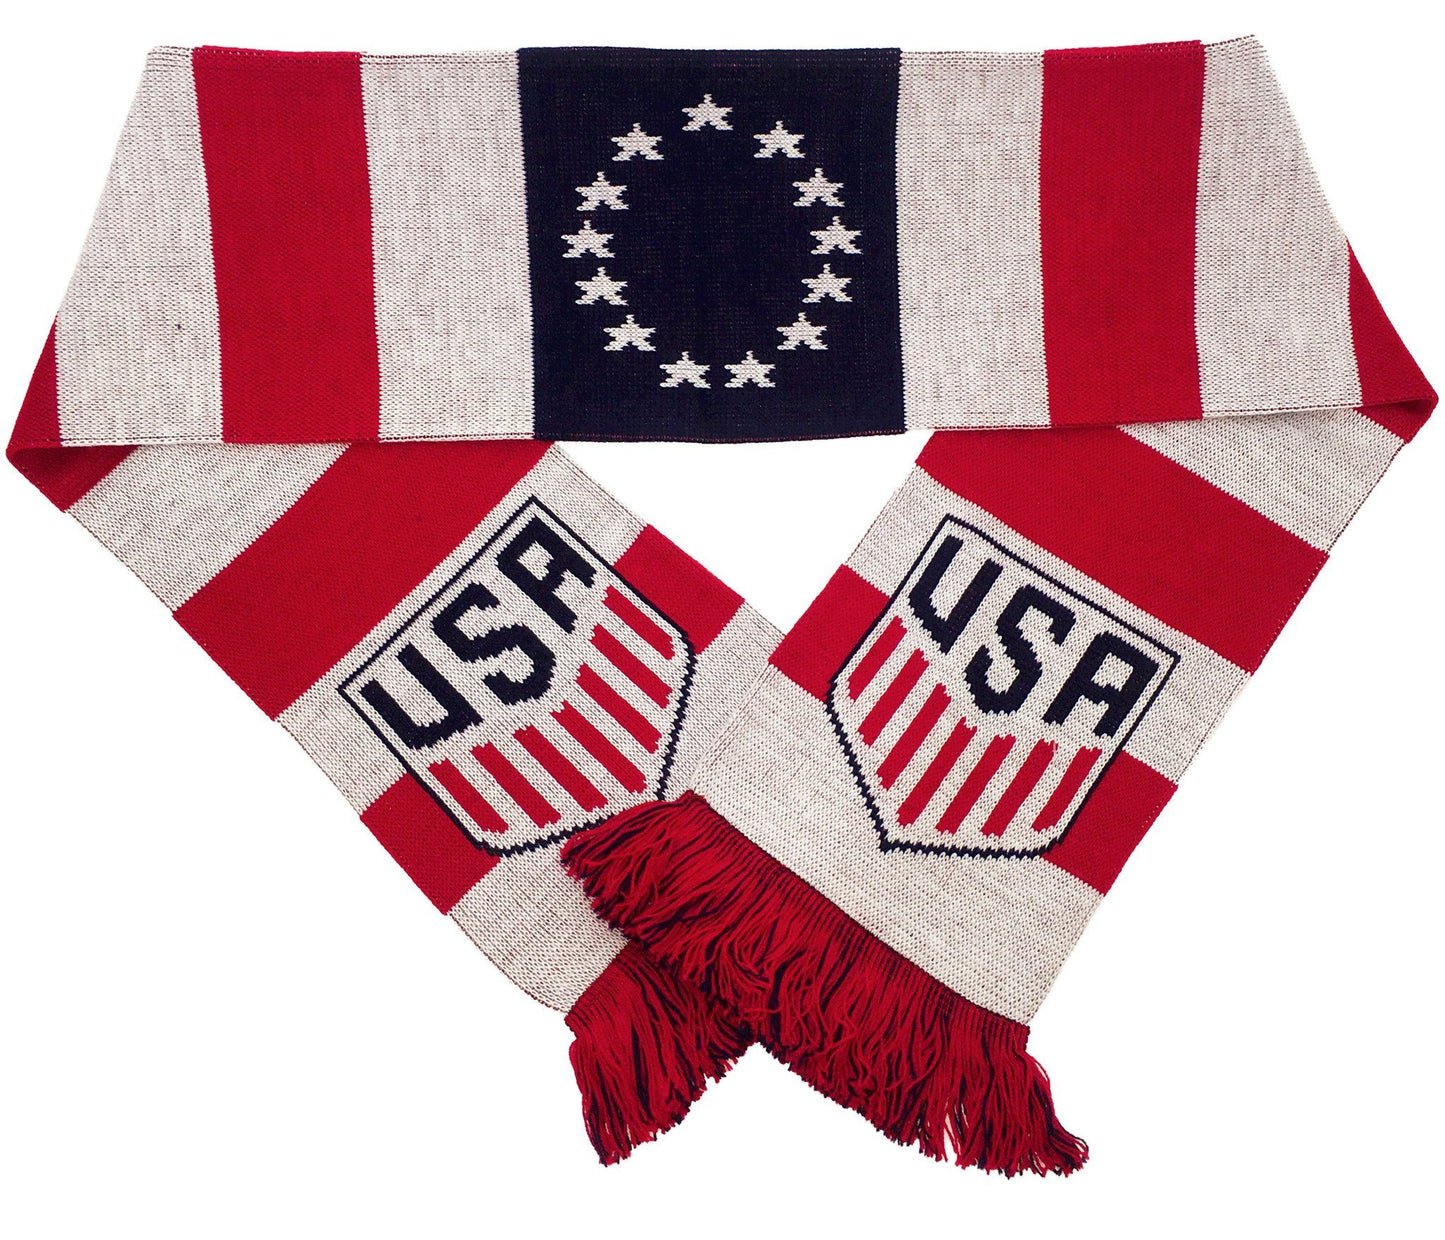 US SOCCER SCARF - Colonial - Ruffneck Scarves - 2